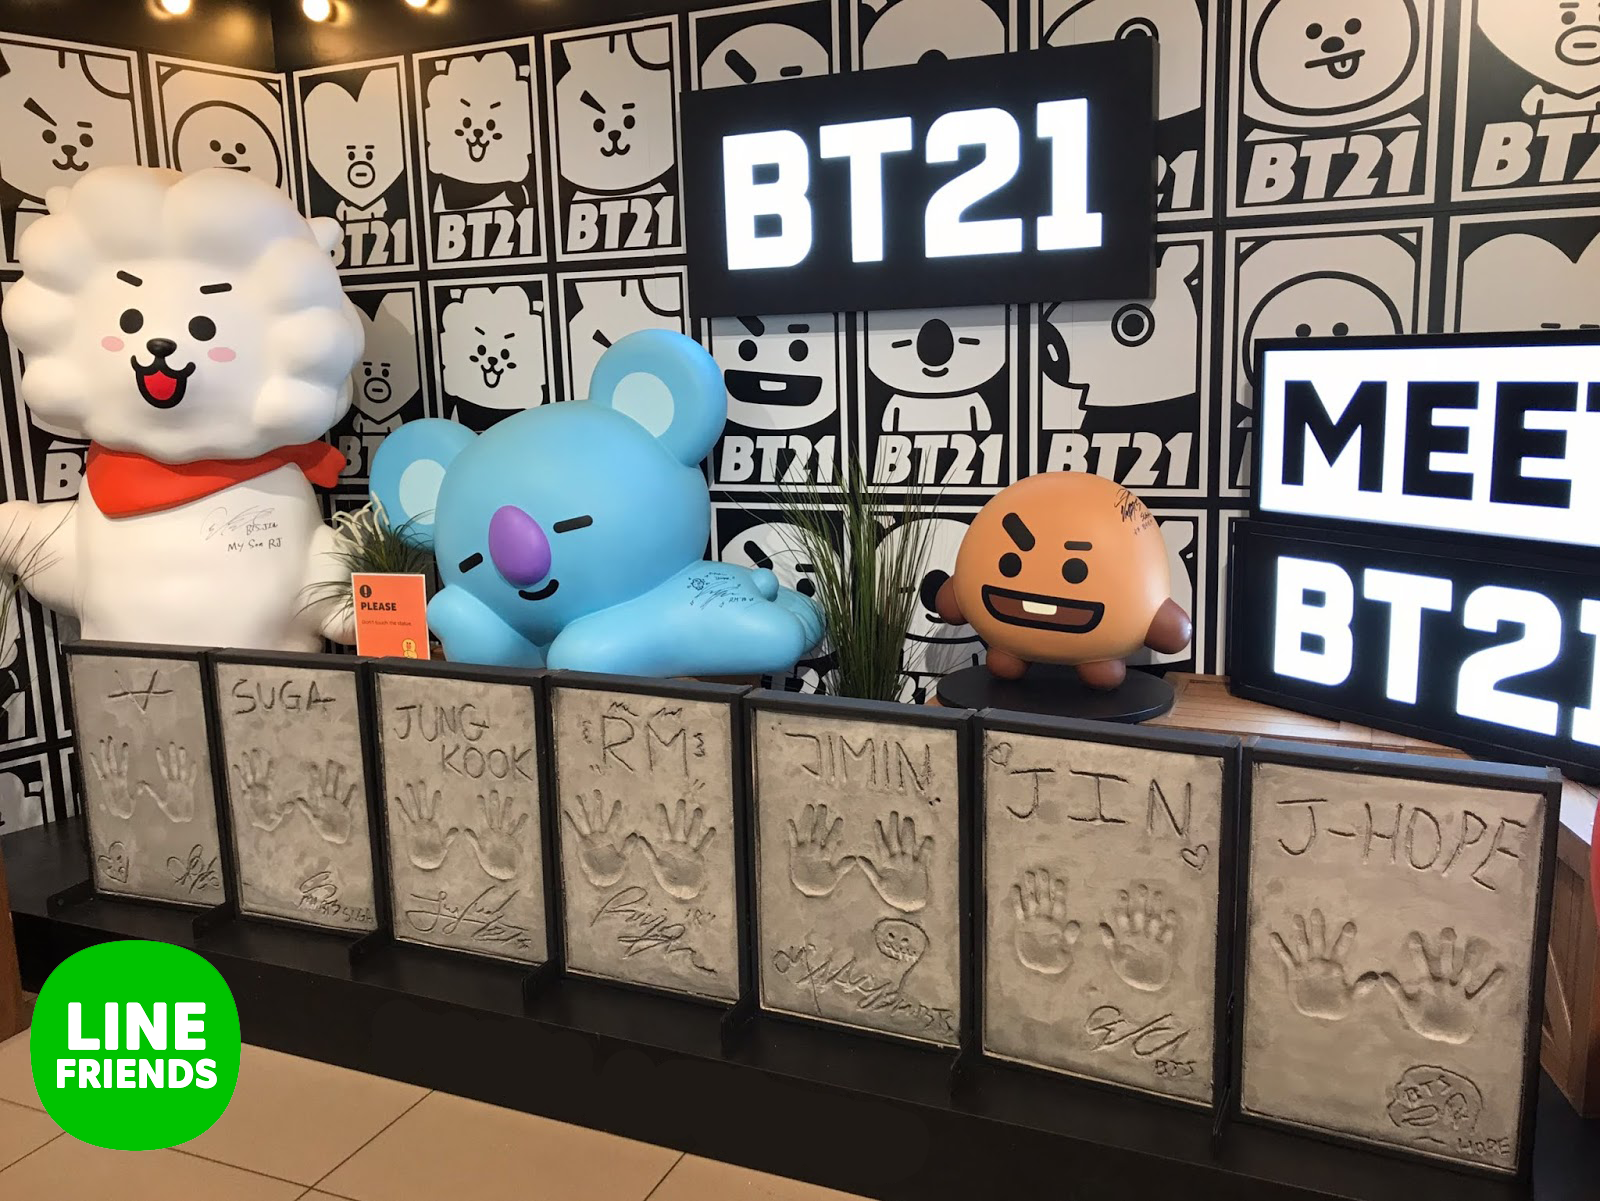 SNL Creative’s Mobile 3D Scanning for BTS and Line Friends